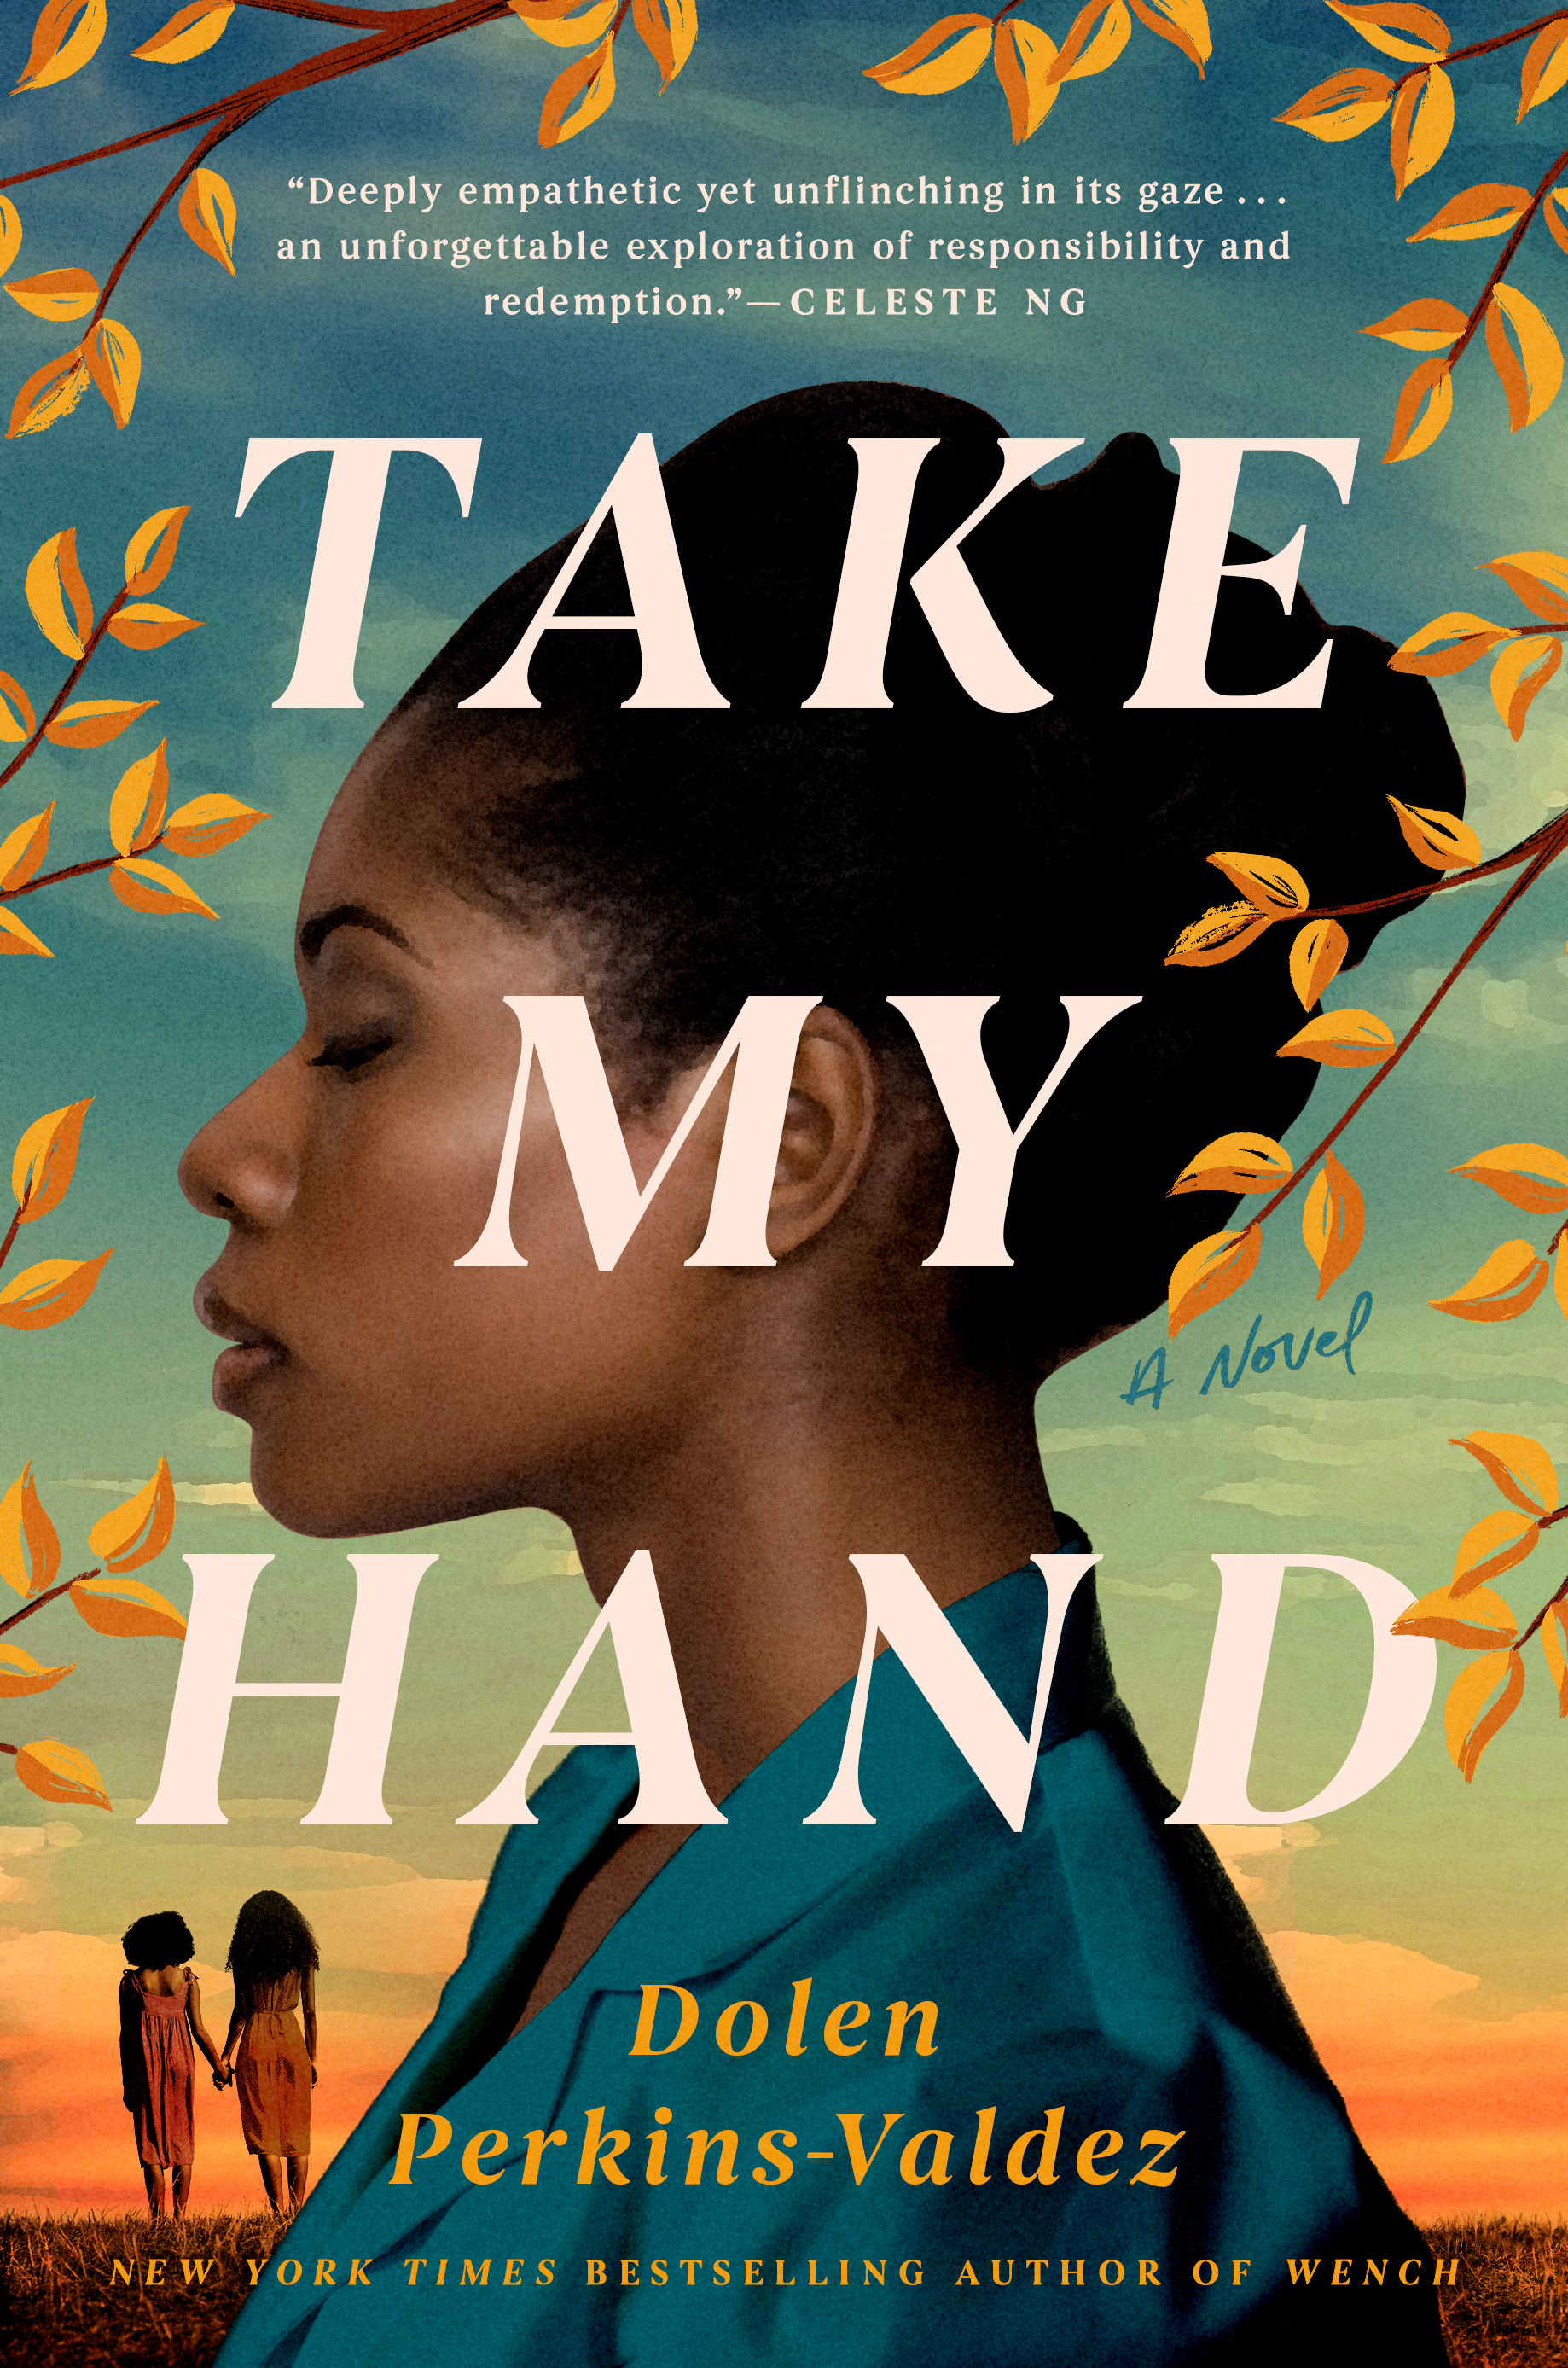 Image of Book Cover featuring a woman in profile with eyes closed. In the background there is a silhouette of two young girls holding hands..